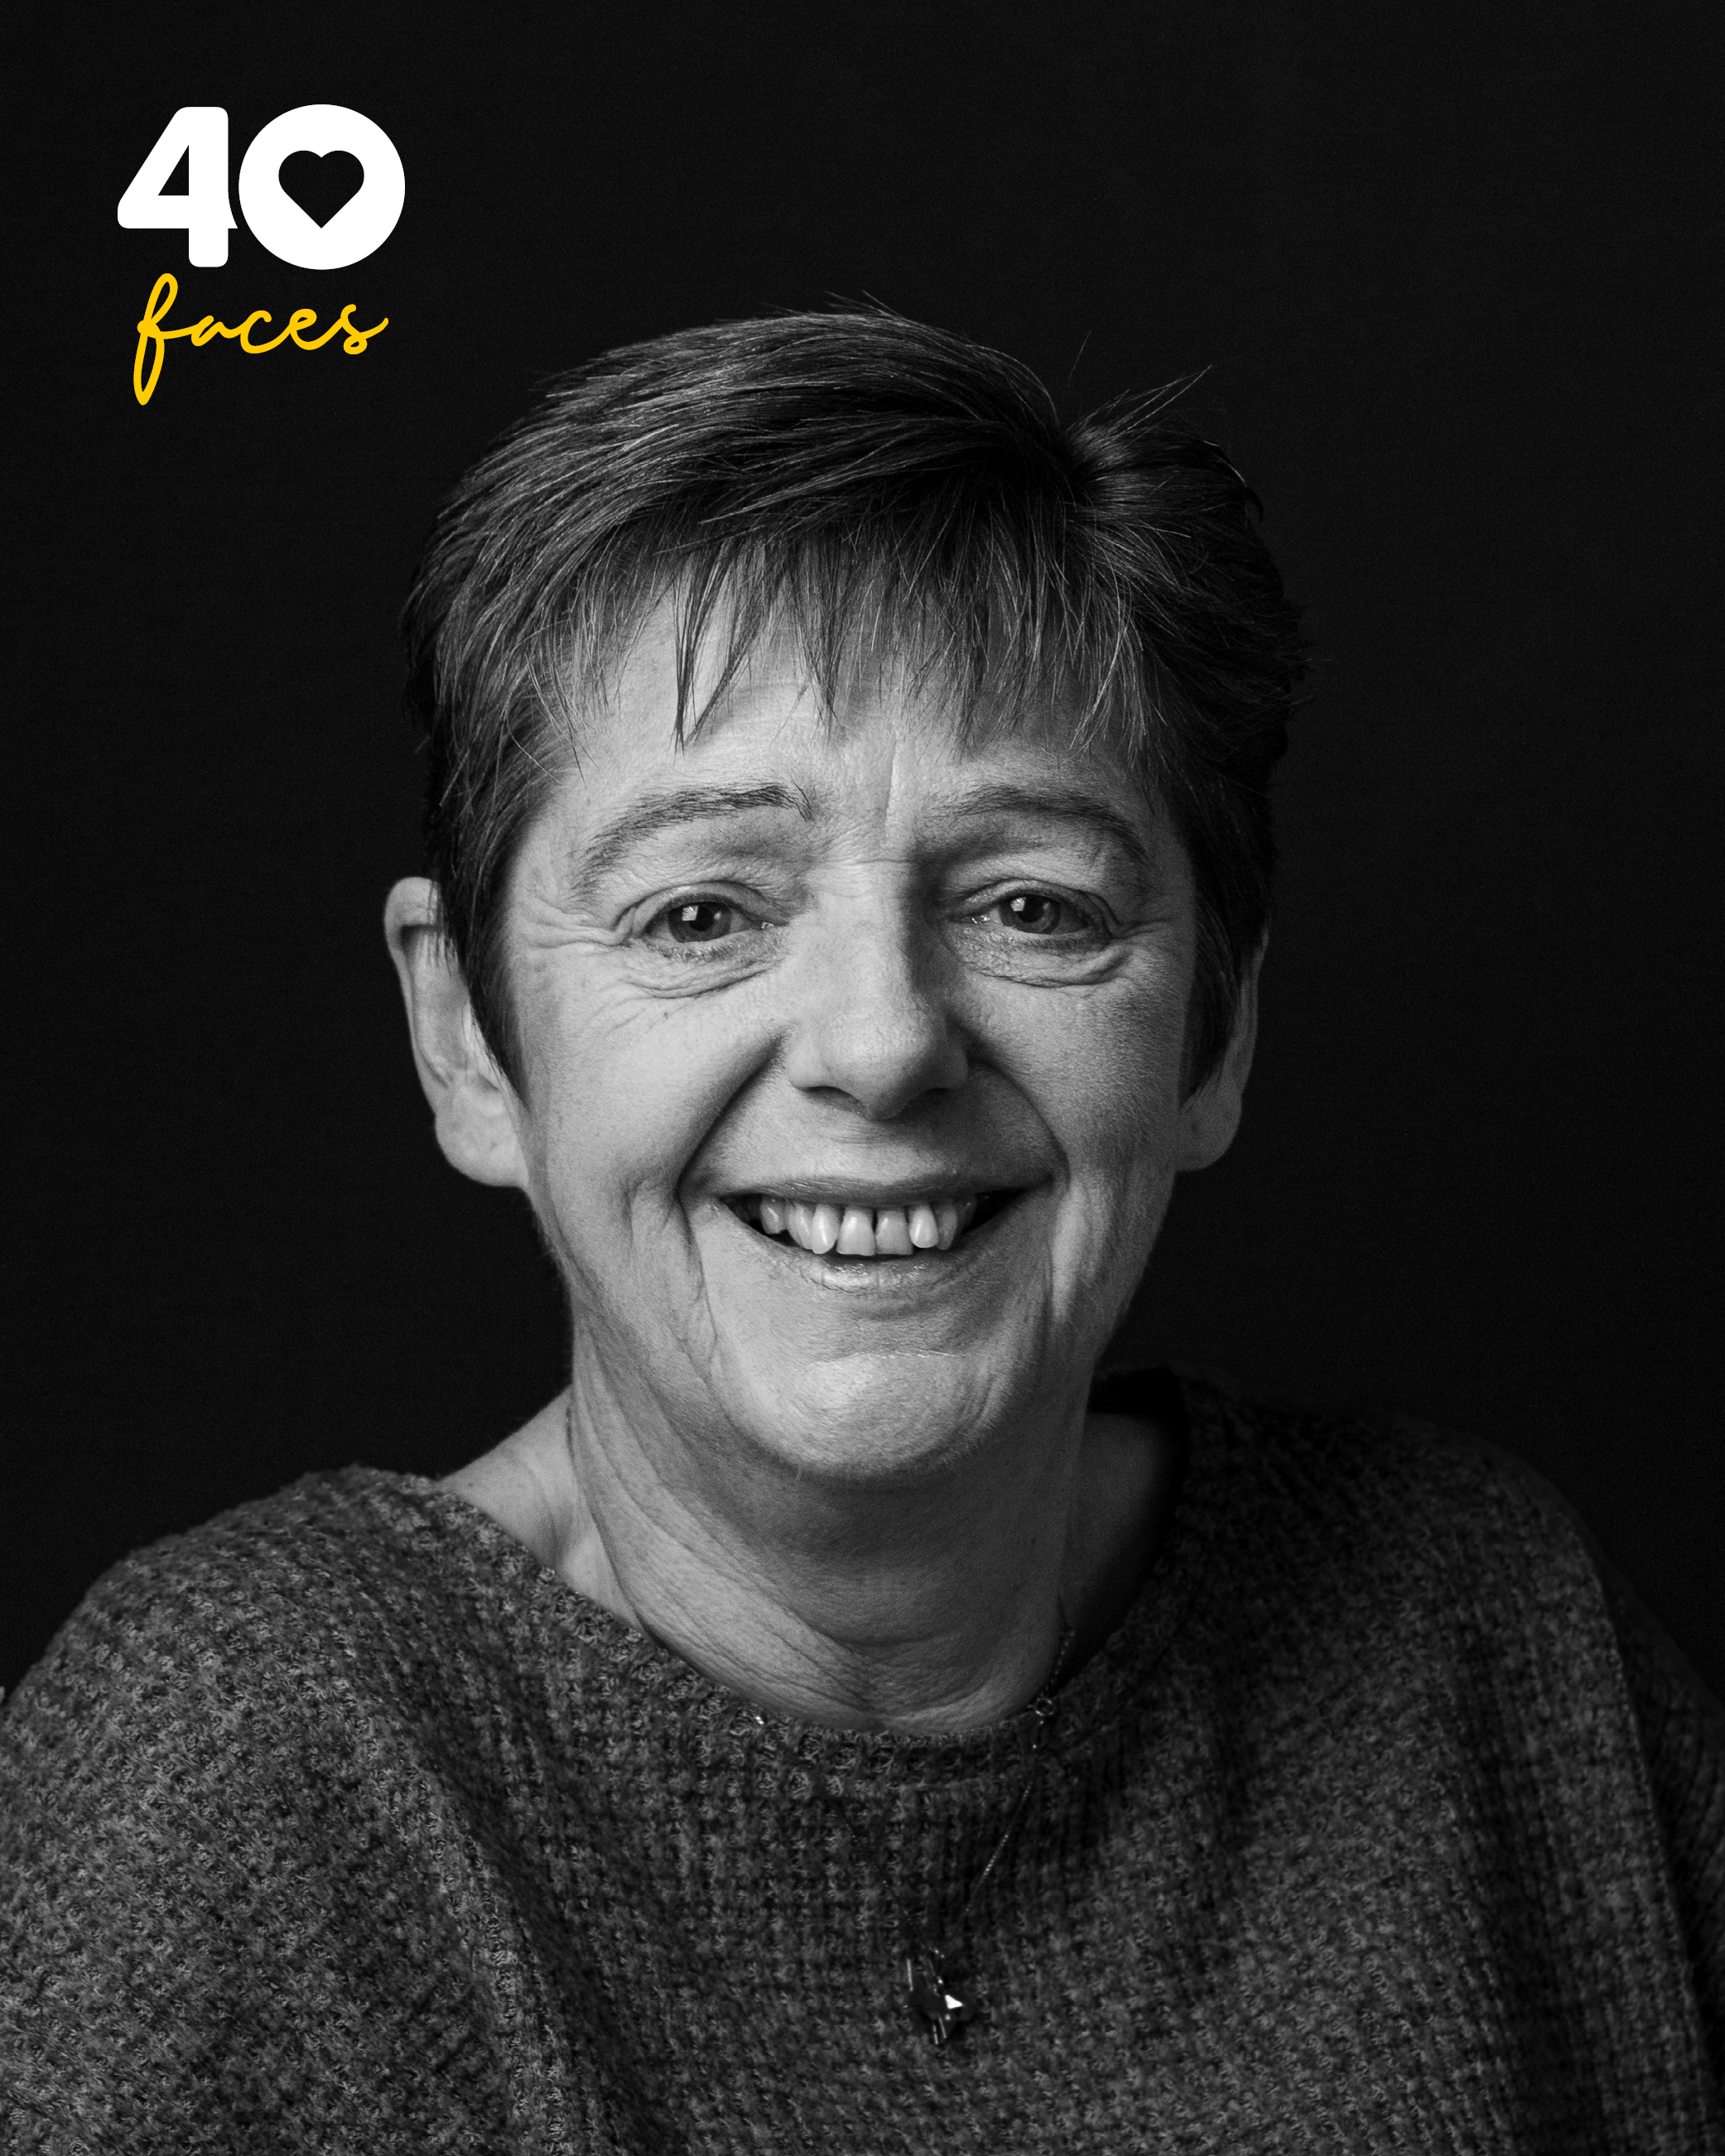 A lady, Marie Pattison, who is a Supporter Care Officer at St Barnabas Hospice, photographed in black and white, against a black backdrop